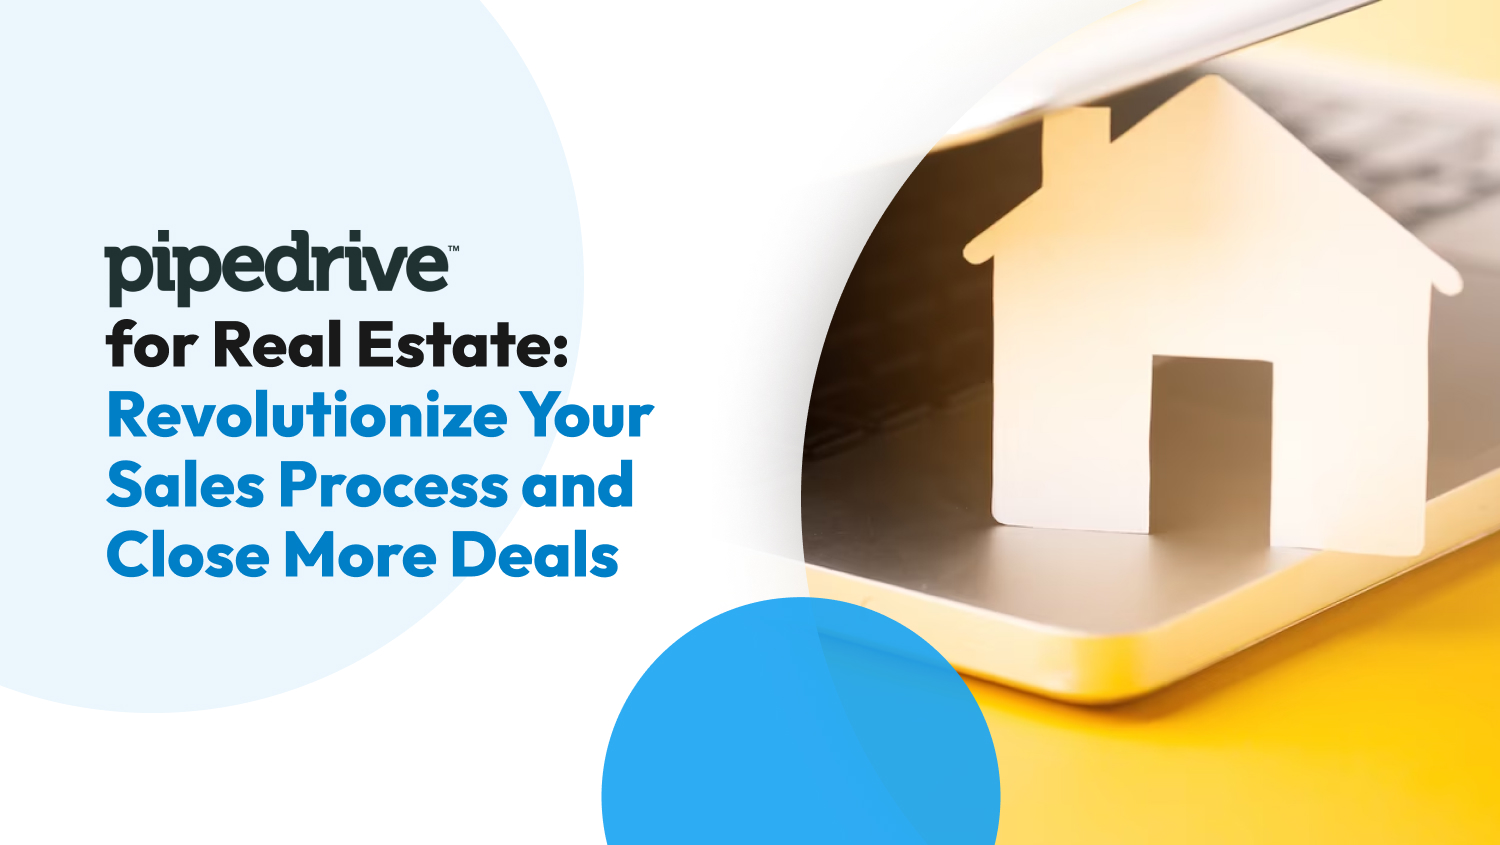 Pipedrive for Real Estate: Revolutionize Your Sales Process and Close More Deals